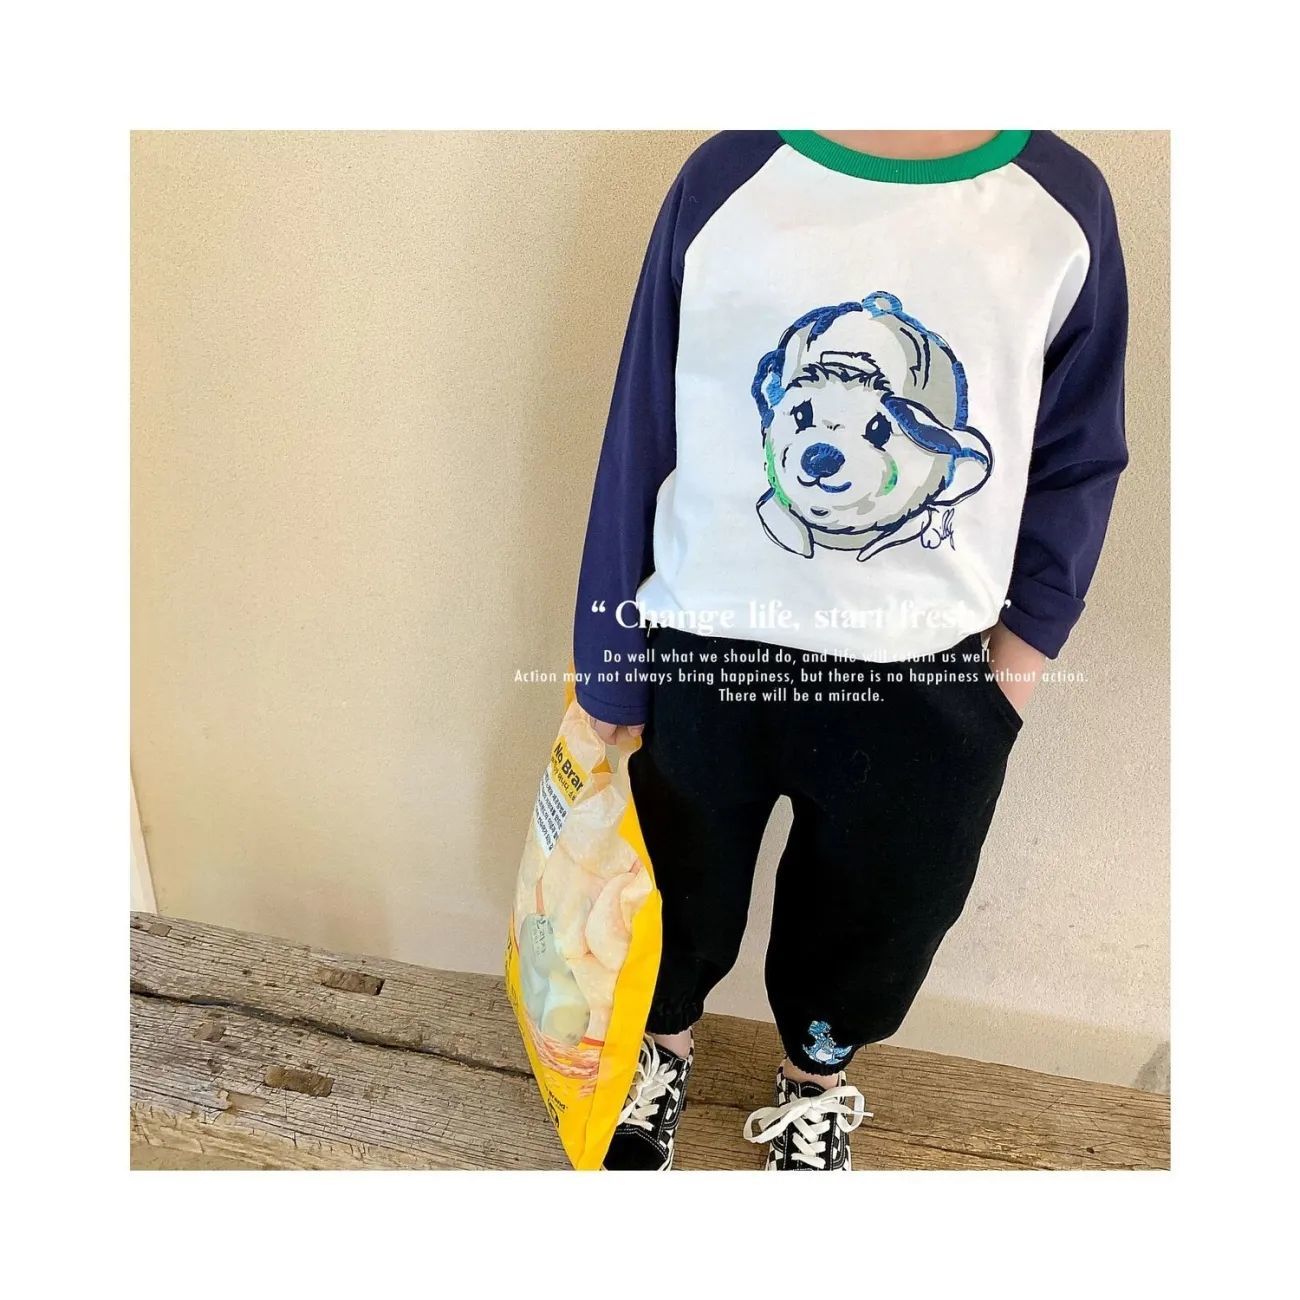 Boys' long-sleeved T-shirt 2021 spring style small and medium-sized children's bear print bottoming shirt children's Korean version of foreign style pure cotton top